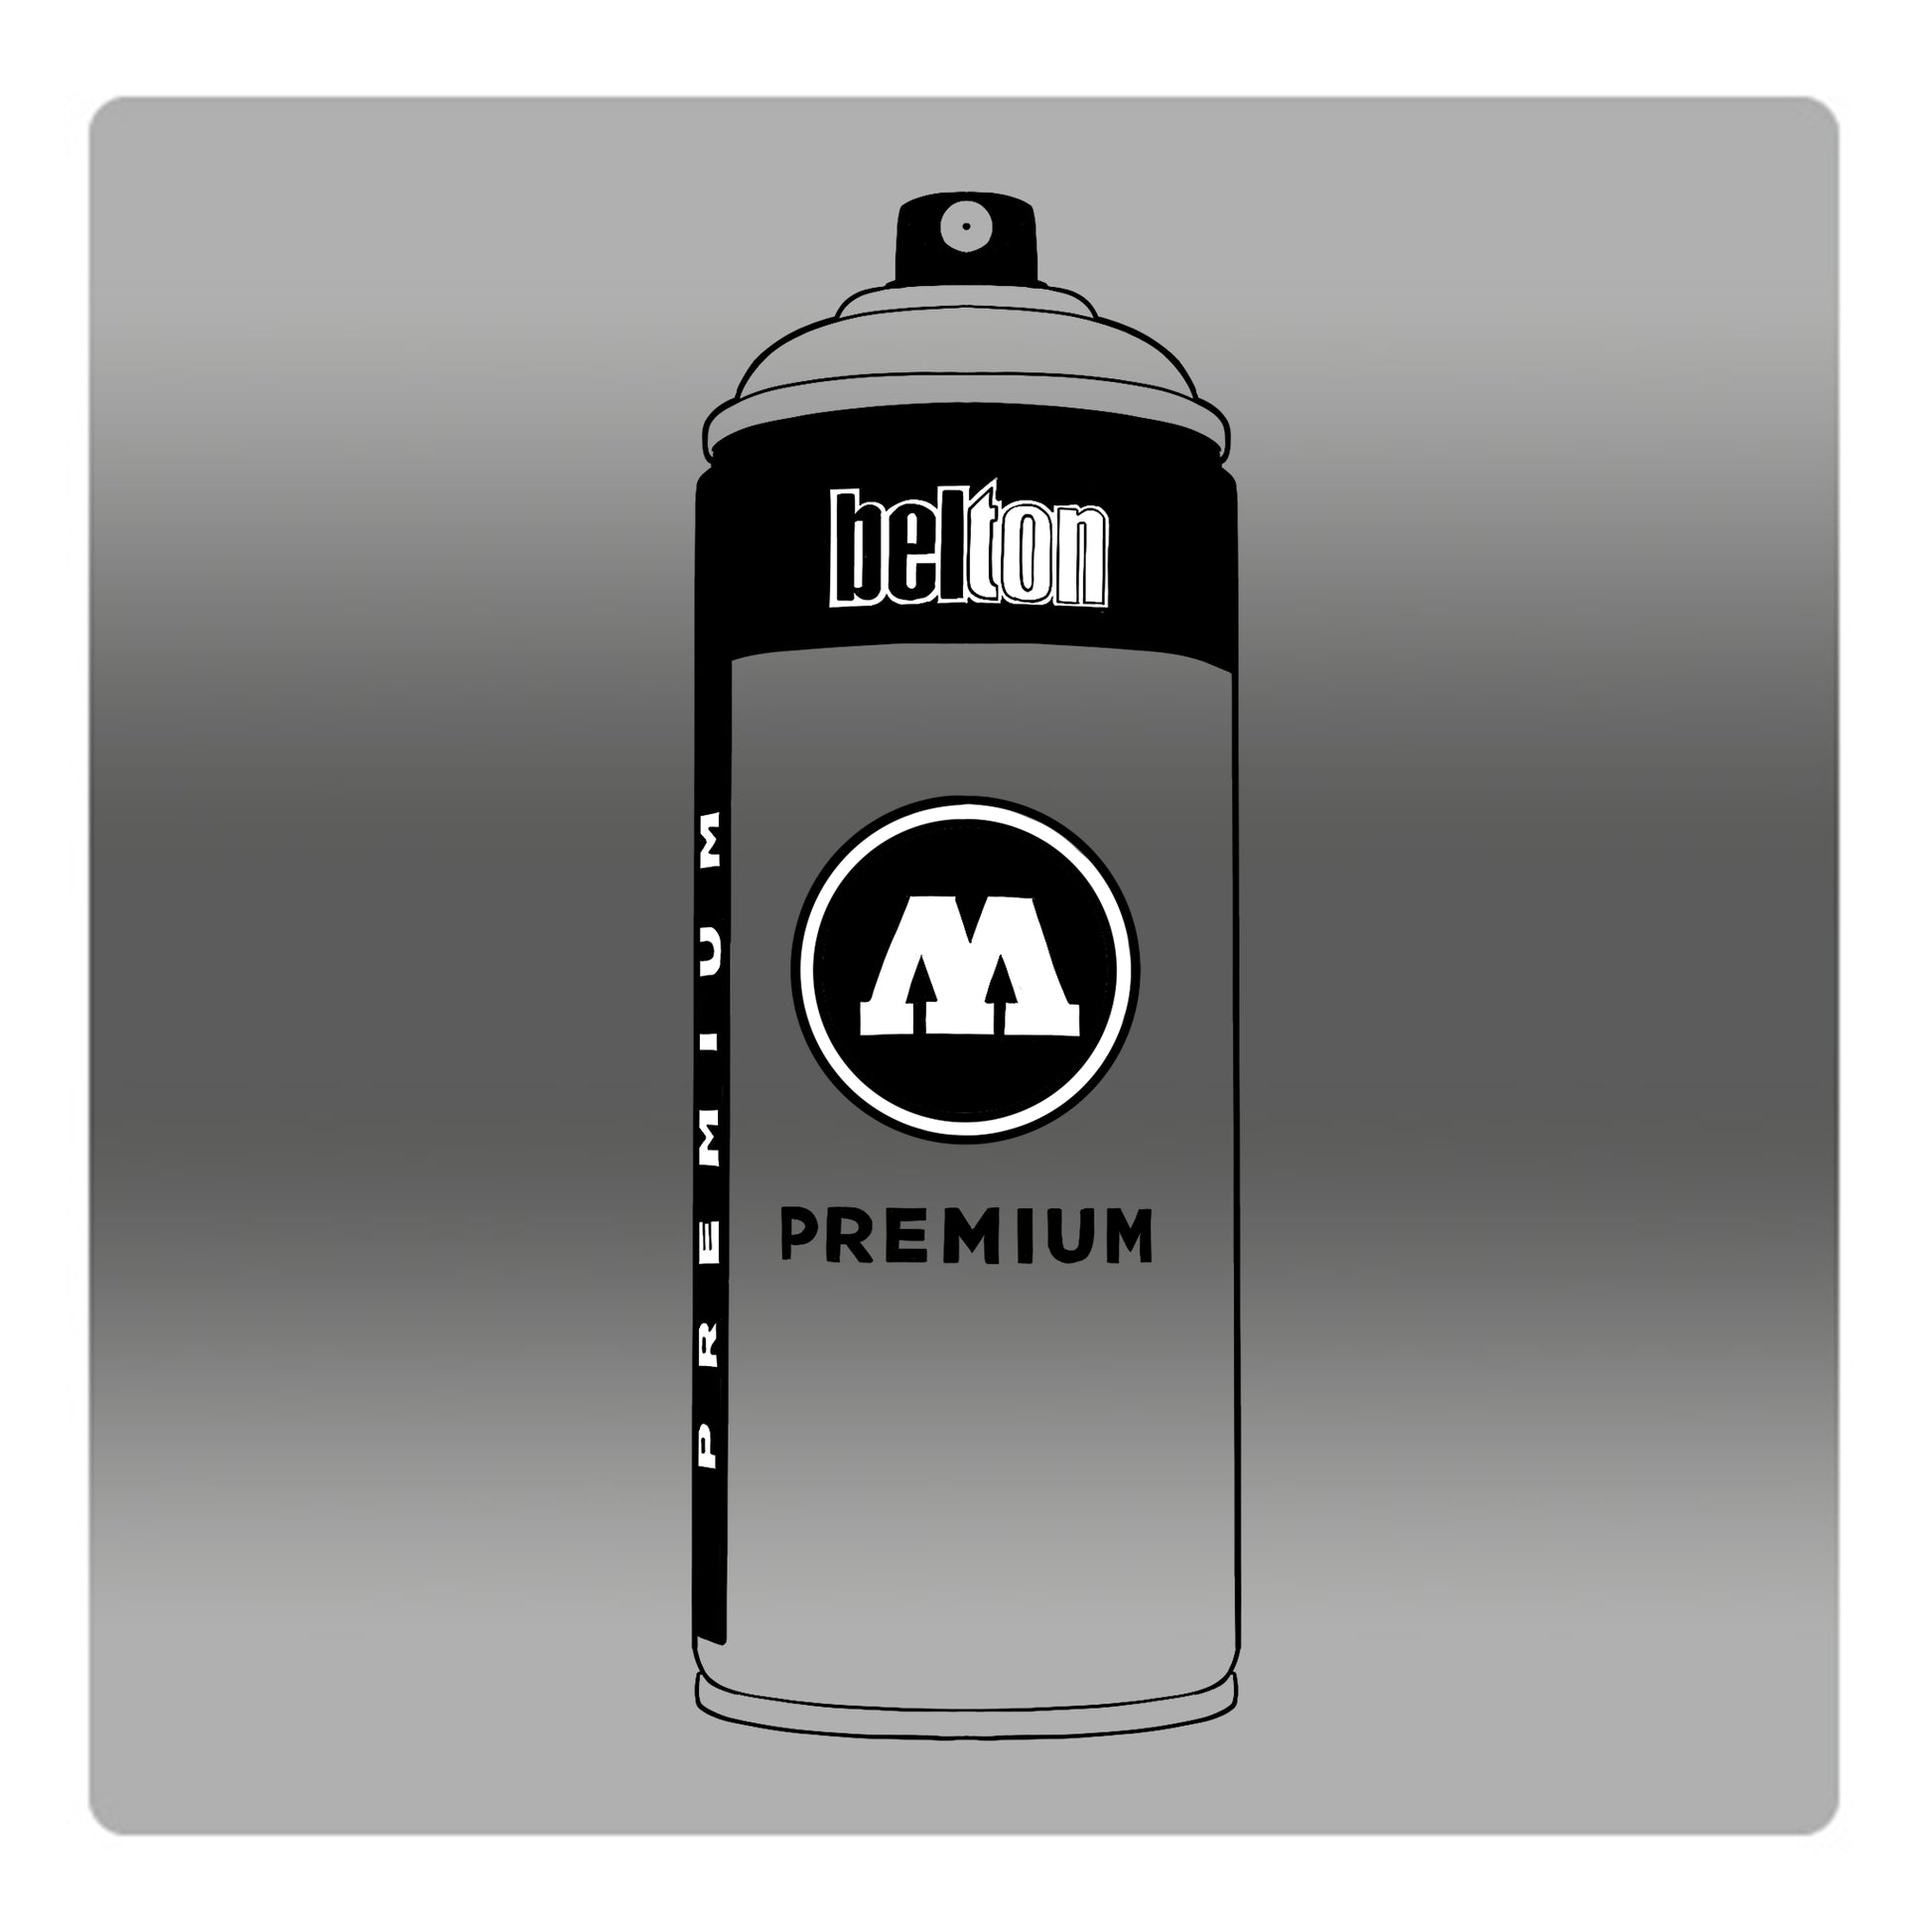 A black outline drawing of a silver gradient spray paint can with the words "belton","premium" and the letter"M" written on the face in black and white font. The background is a color swatch of the same silver gradient with a white border